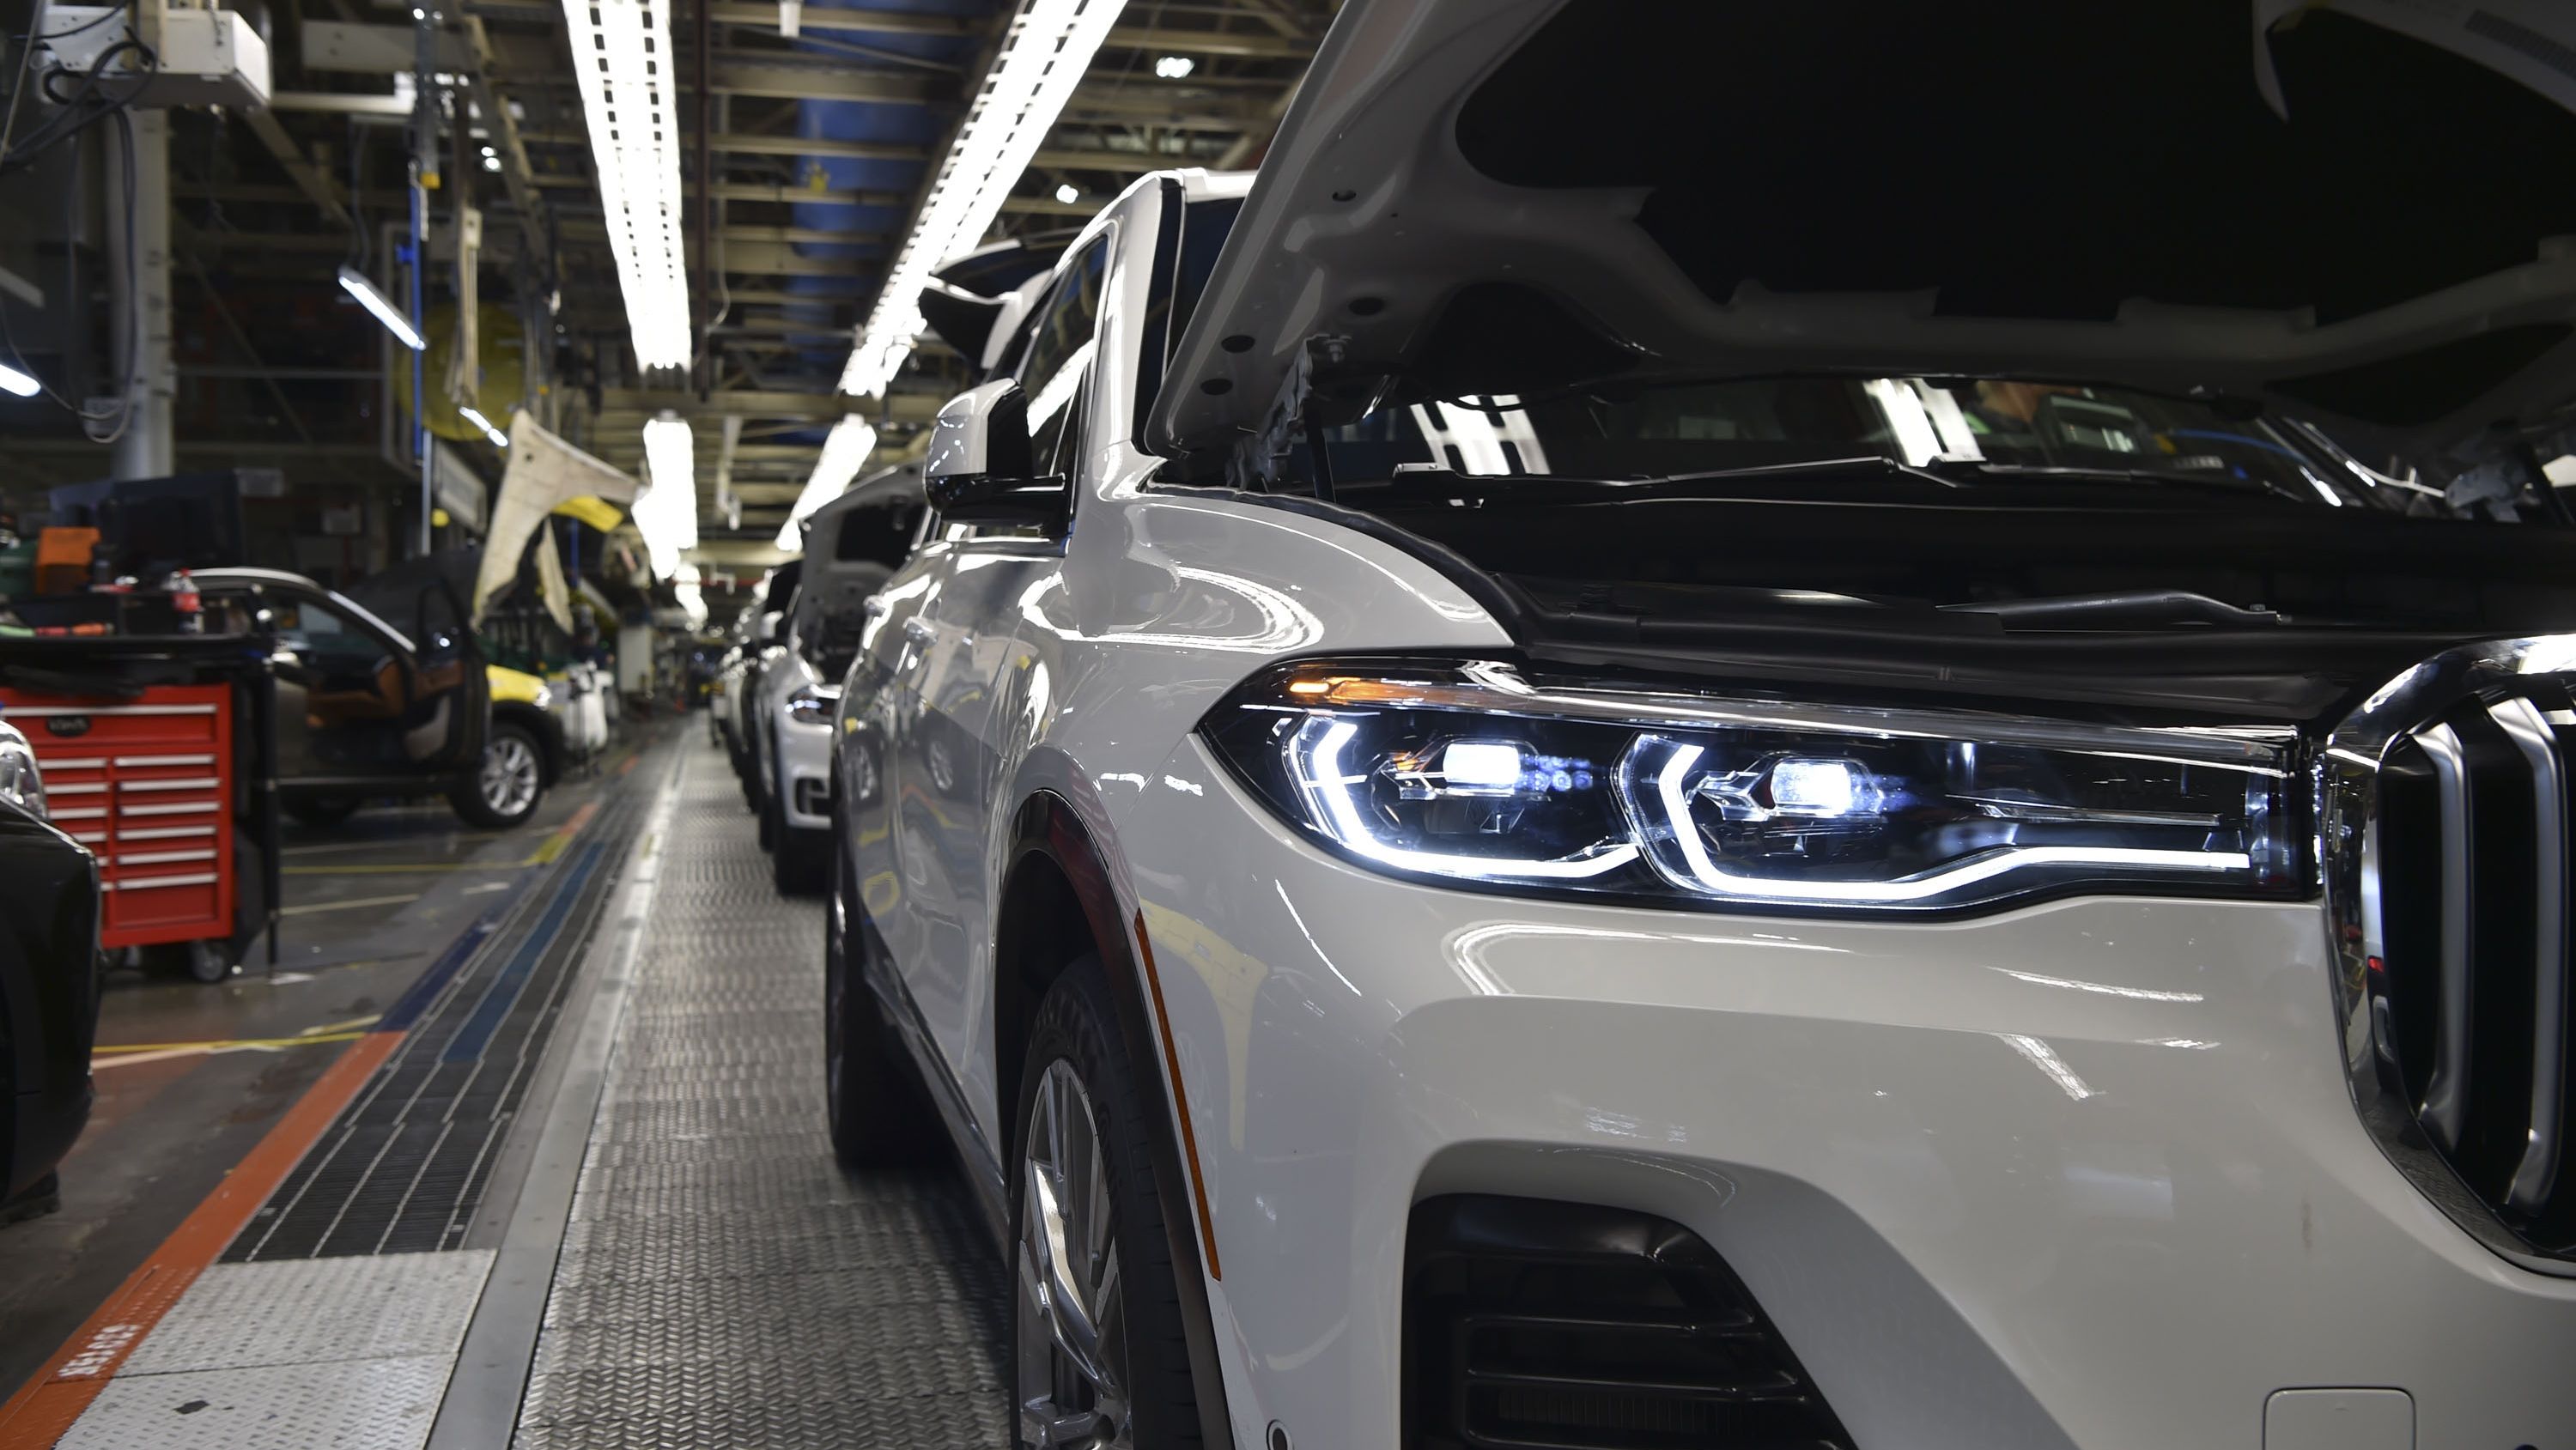 2017 BMW X7 Goes into Production, First Teasers Released